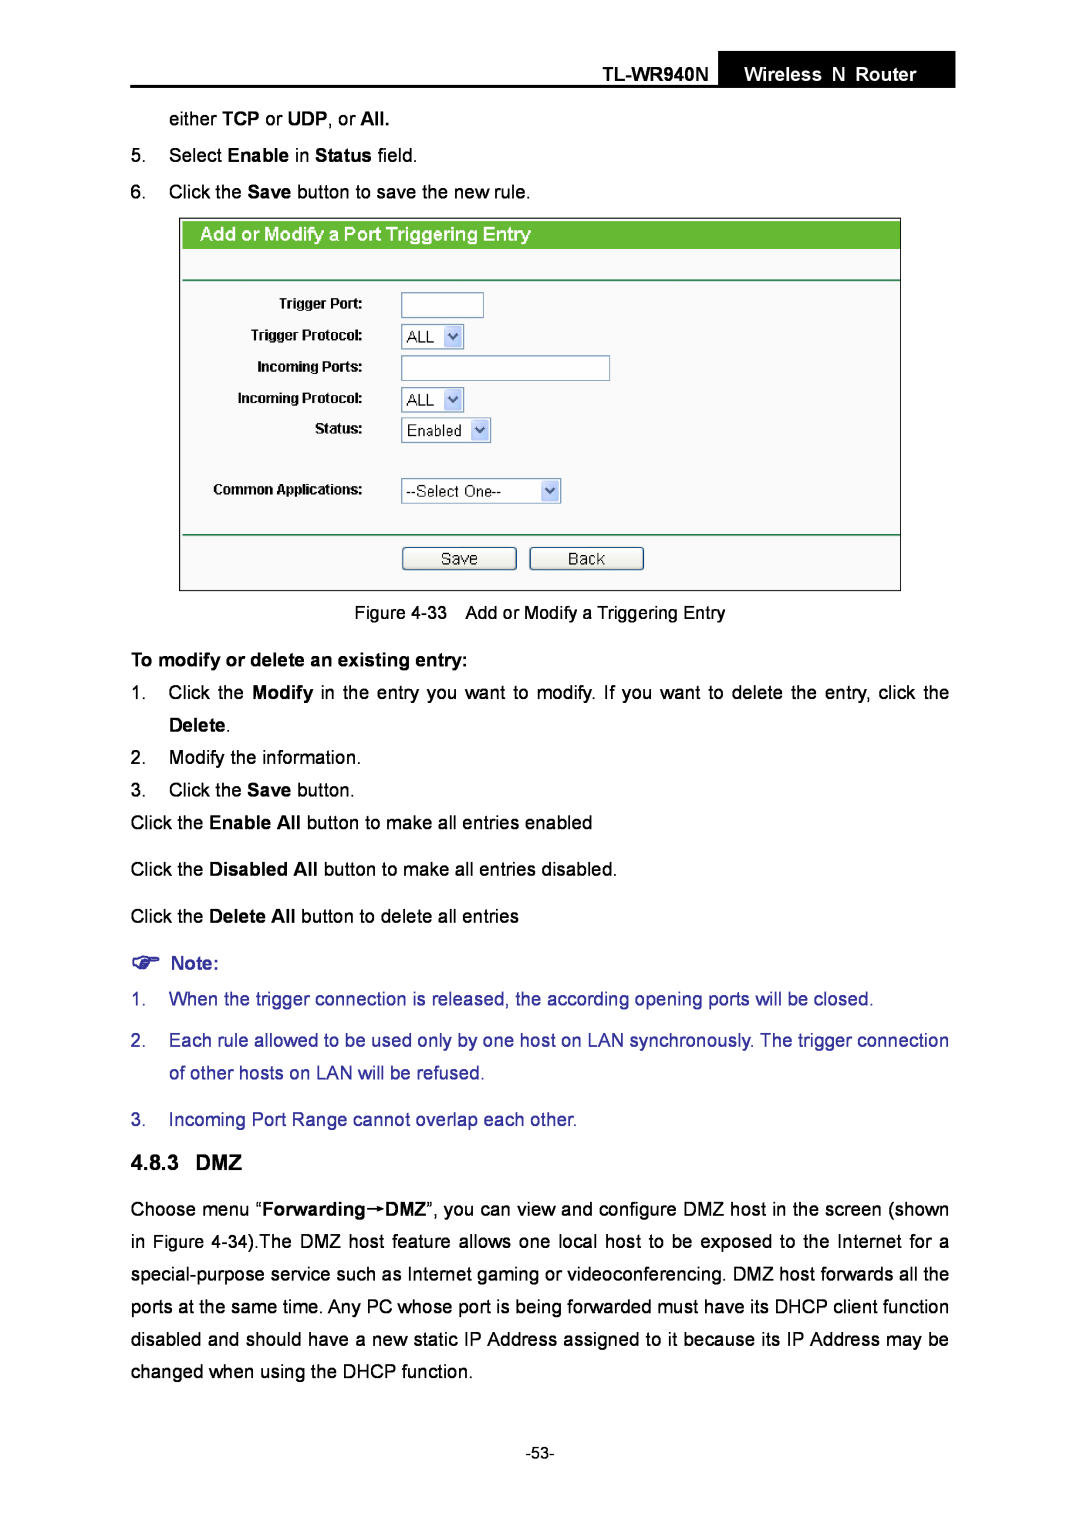 TP-Link manual 4.8.3 DMZ, Incoming Port Range cannot overlap each other, TL-WR940N Wireless N Router 